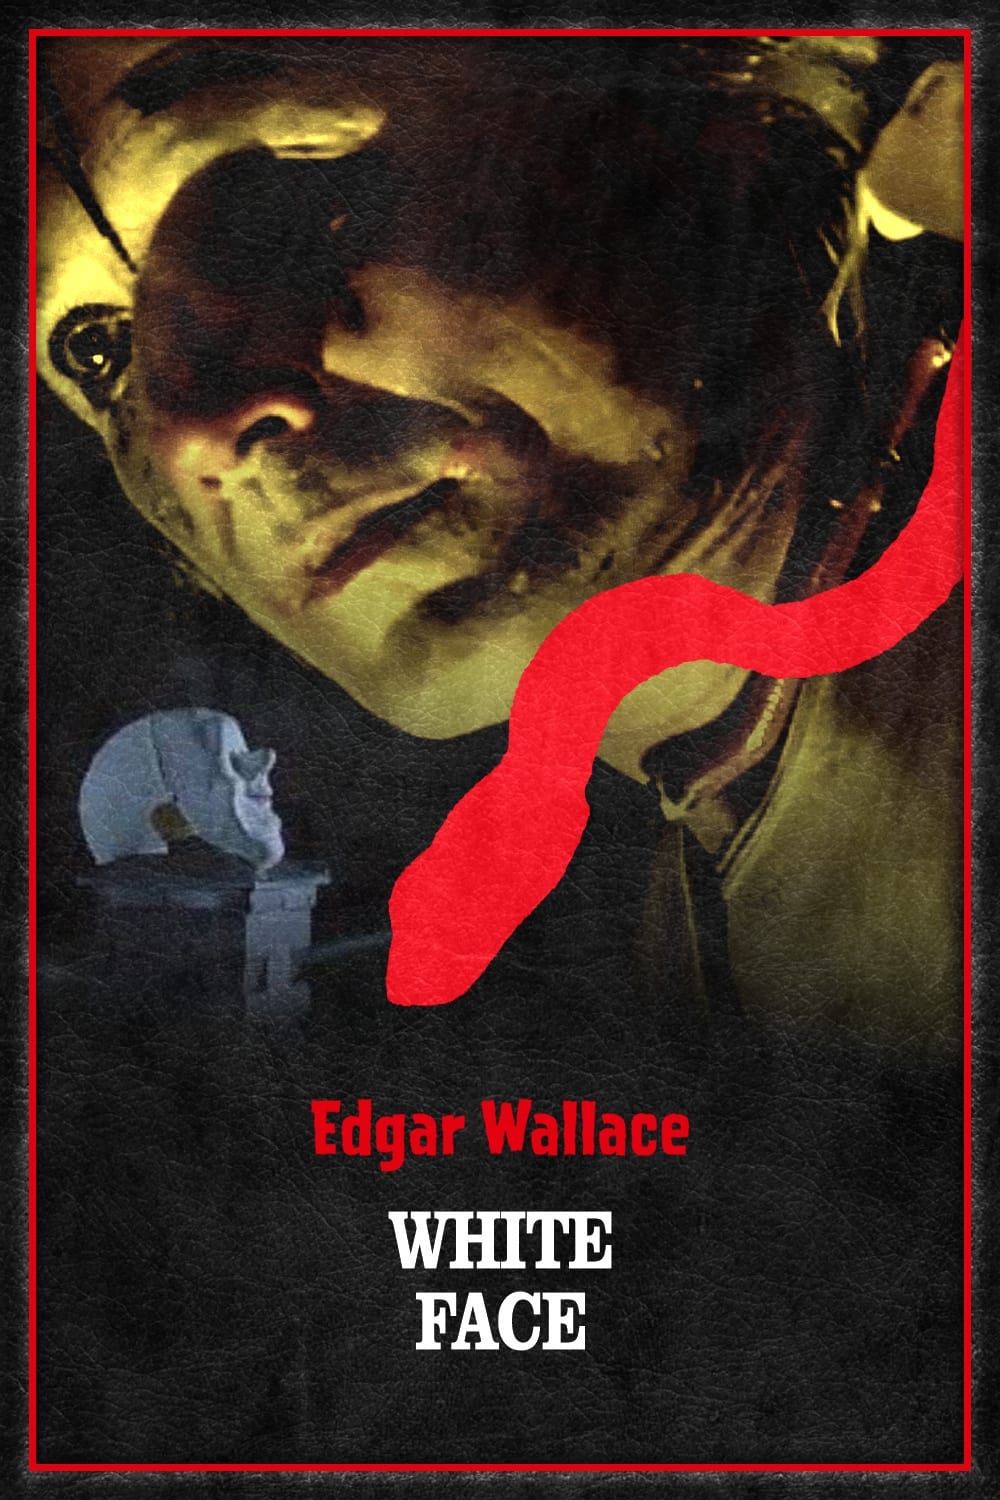 Edgar Wallace - Whiteface